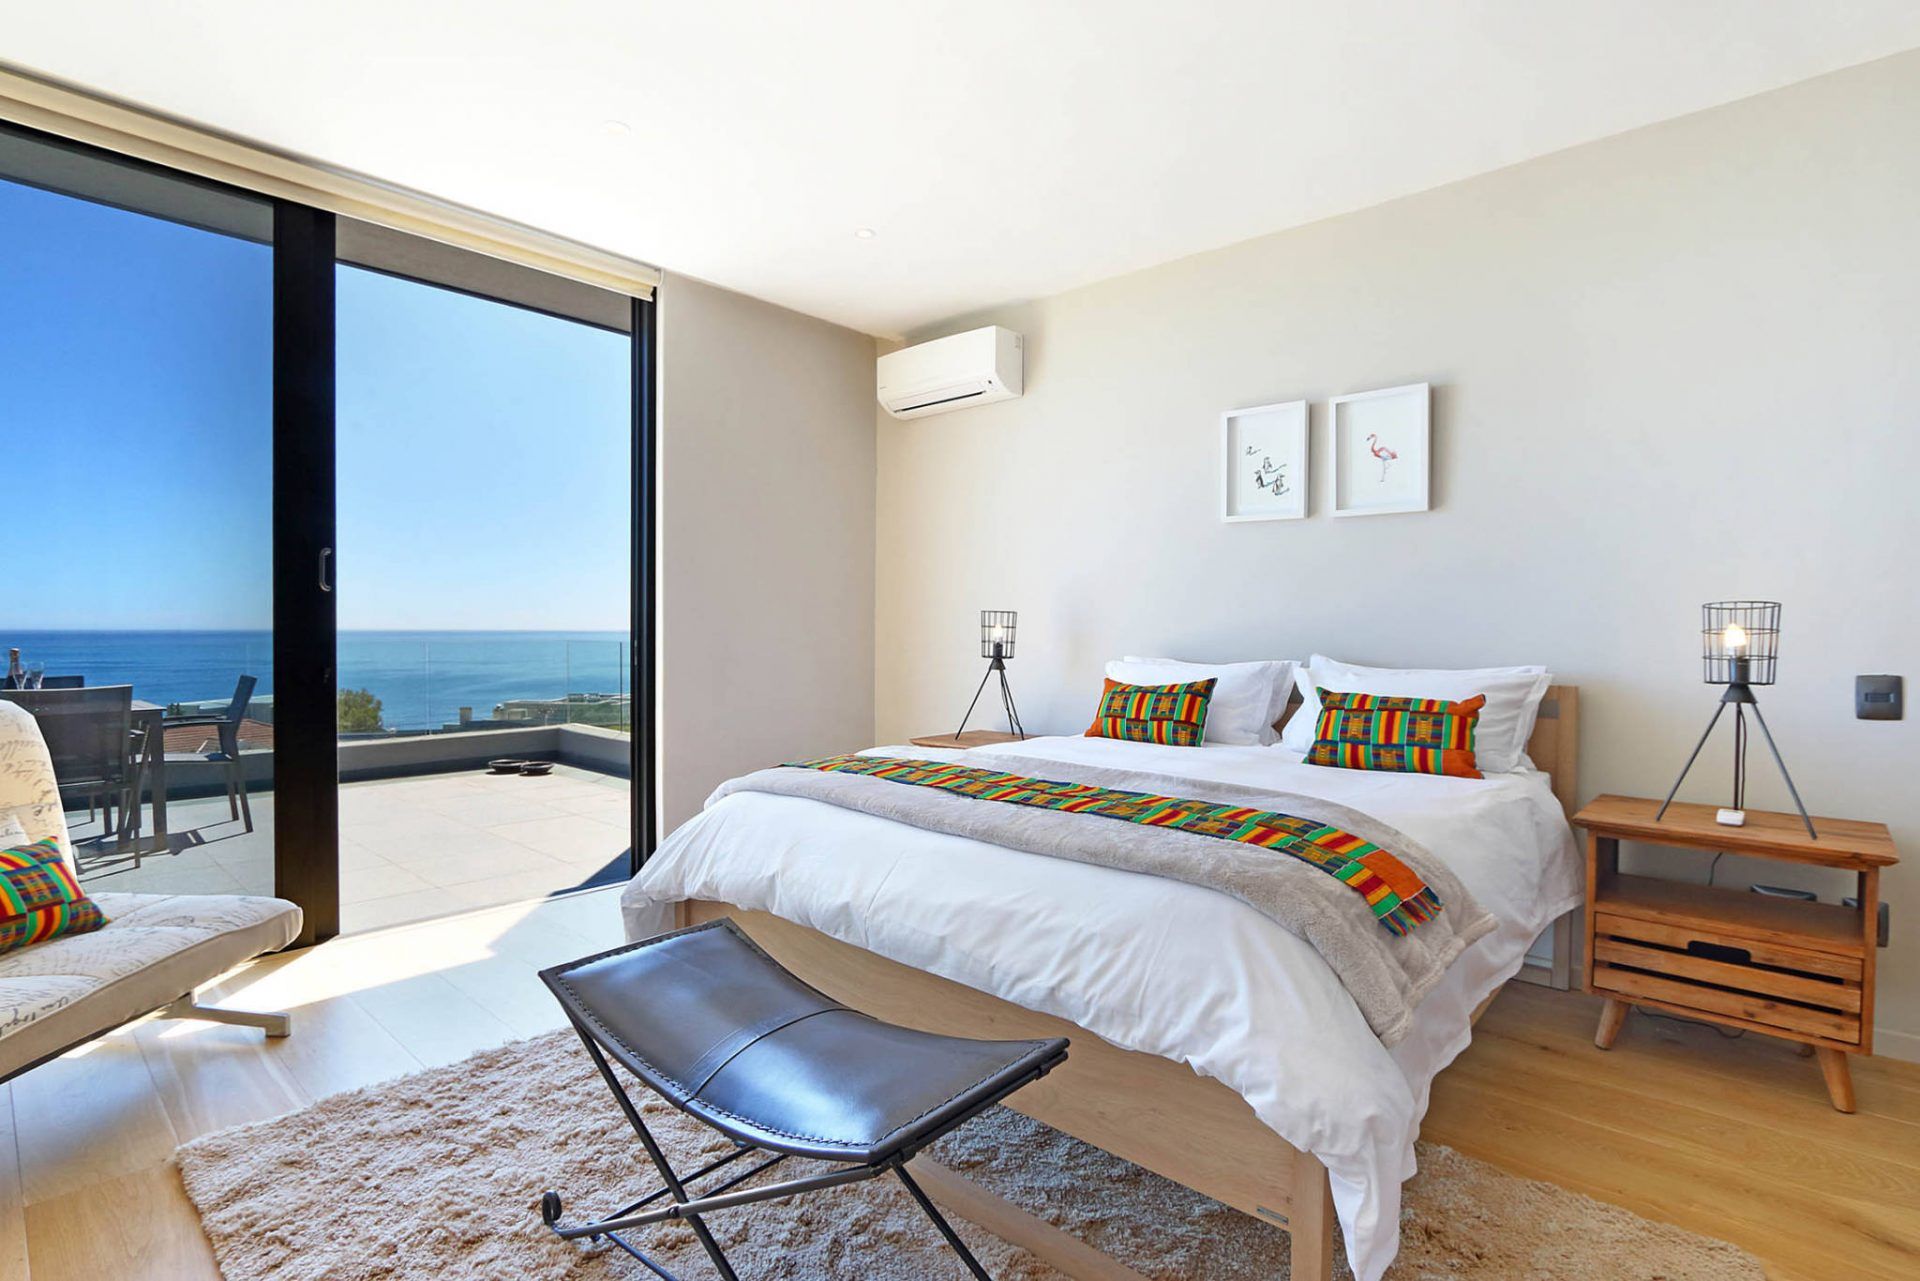 Photo 12 of 20 Finchley Villa accommodation in Camps Bay, Cape Town with 6 bedrooms and 5 bathrooms